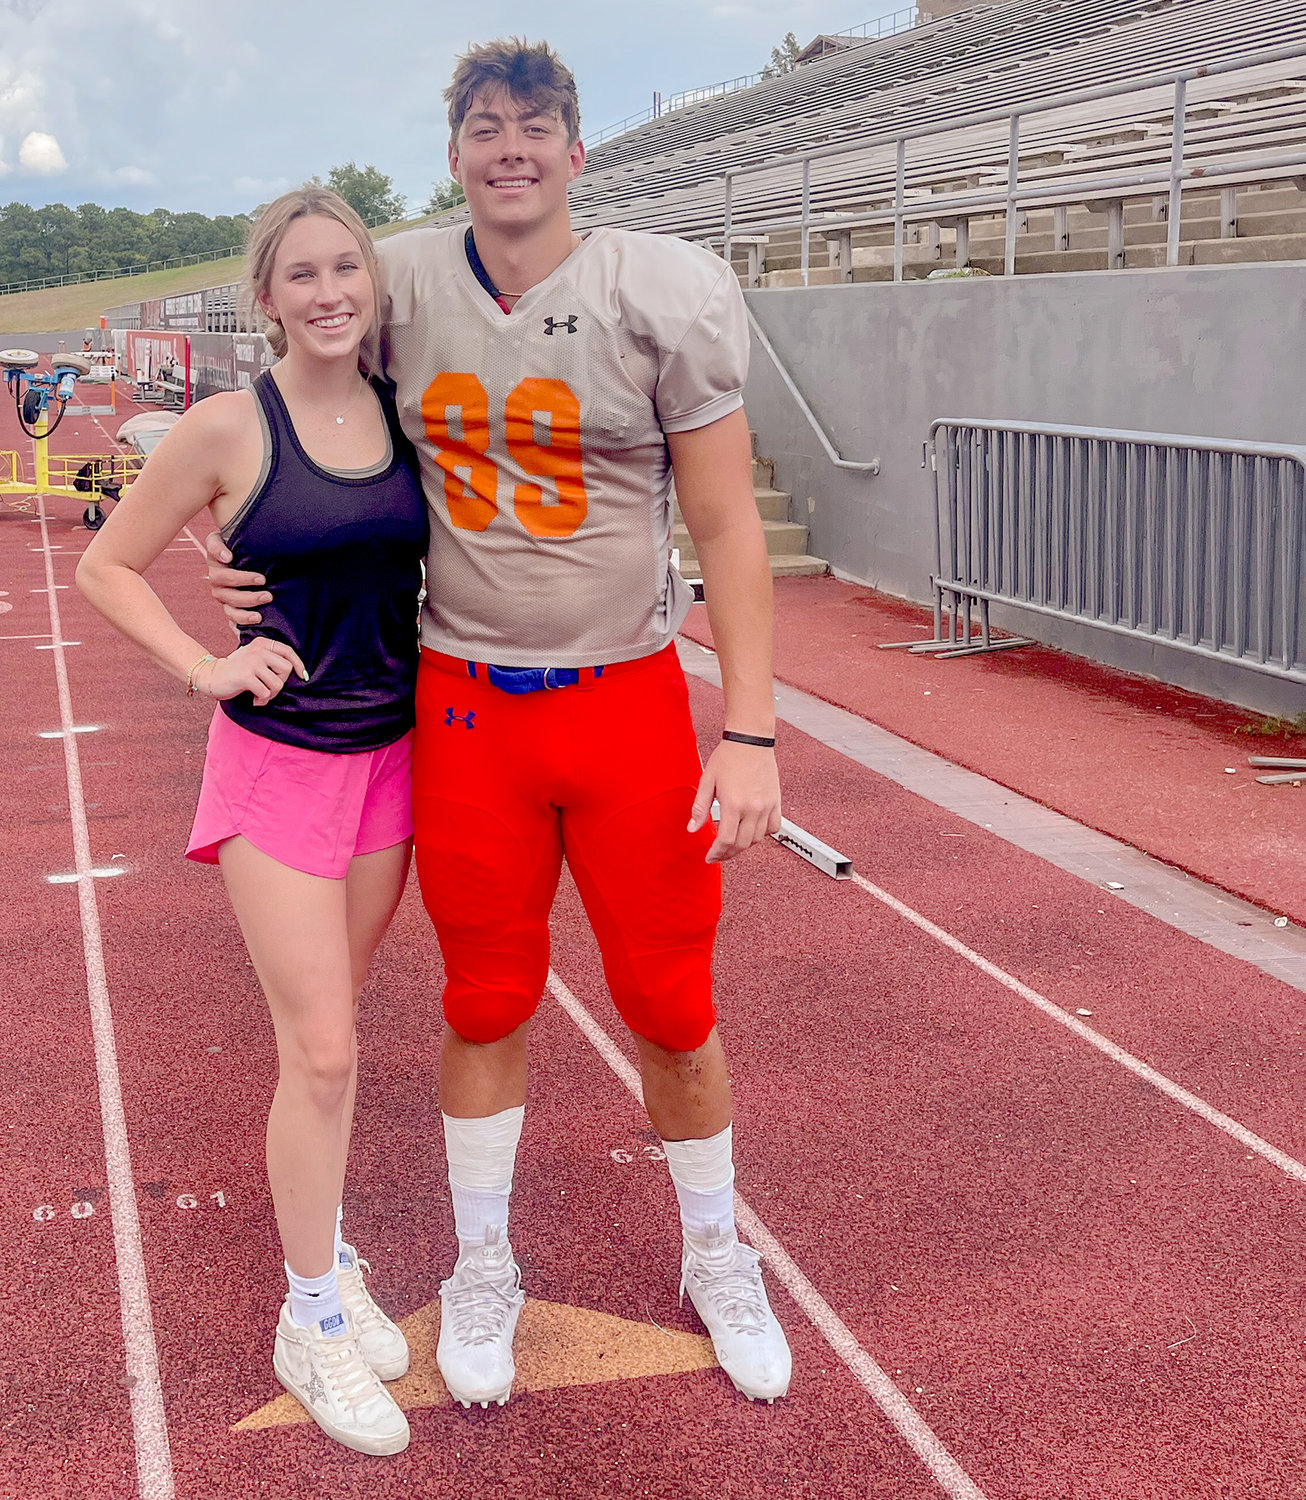 Former Aledo Bearcat state swimming champion Elijah Sohn is switching from swimming to football and transferred from SMU to Sam Houston State. He is pictured with his girlfriend Sydney Stafford following a preseason scrimmage. The Bearkats open the season Saturday at Texas A&M, where Sohn began his college career.